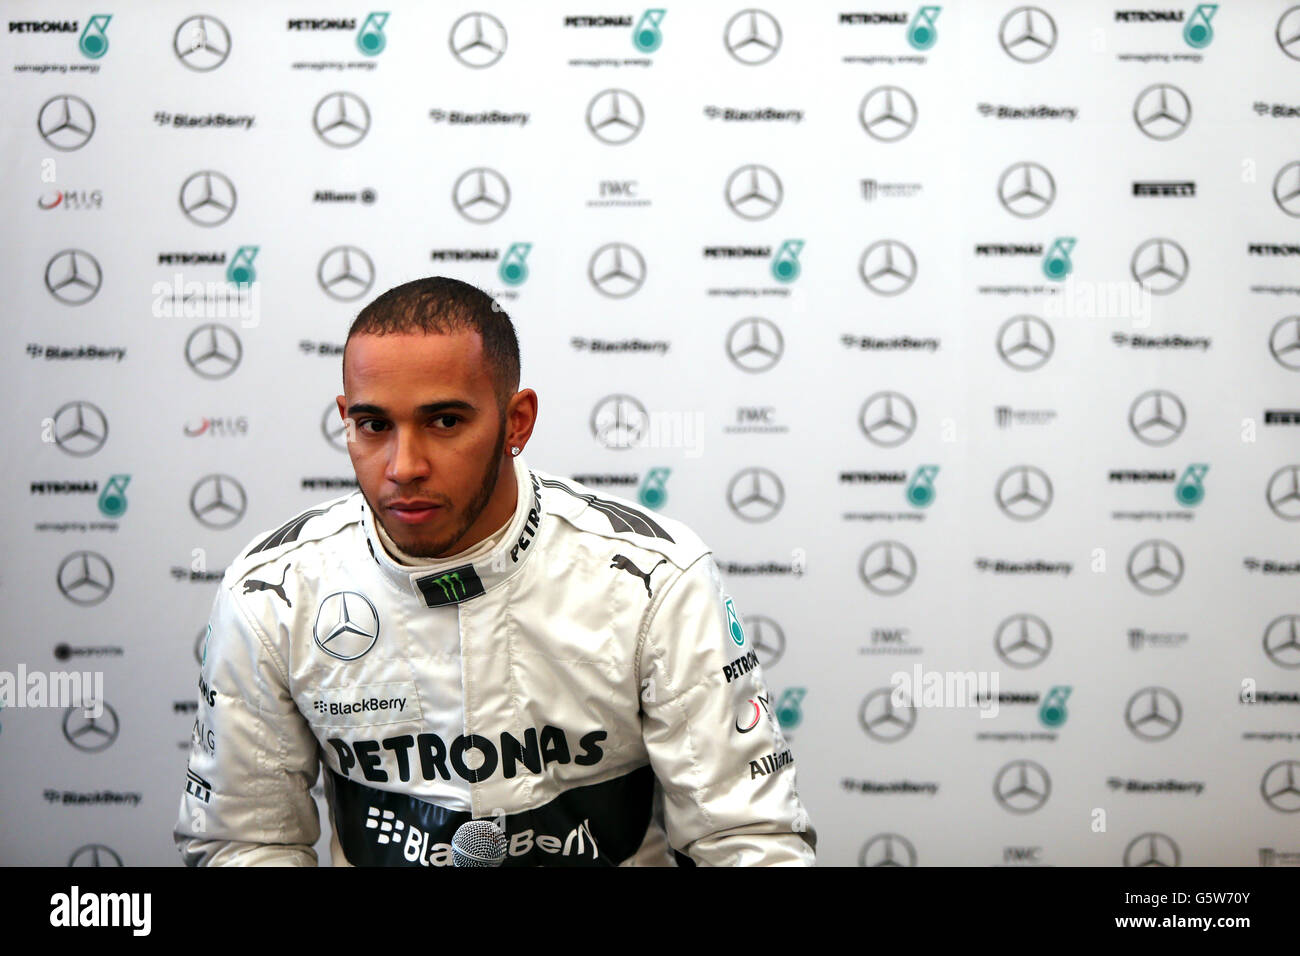 Lewis Hamilton during the Mercedes F1 W04 Launch at Circuito de Jerez, Jerez, Spain. PRESS ASSOCIATION Photo. Picture date: Monday February 4, 2013. Photo credit should read: David Davies/PA Wire. RESTRICTIONS: Use subject to restrictions. Editorial use in print media and internet only. No mobile or TV. Commercial use with prior consent. Stock Photo